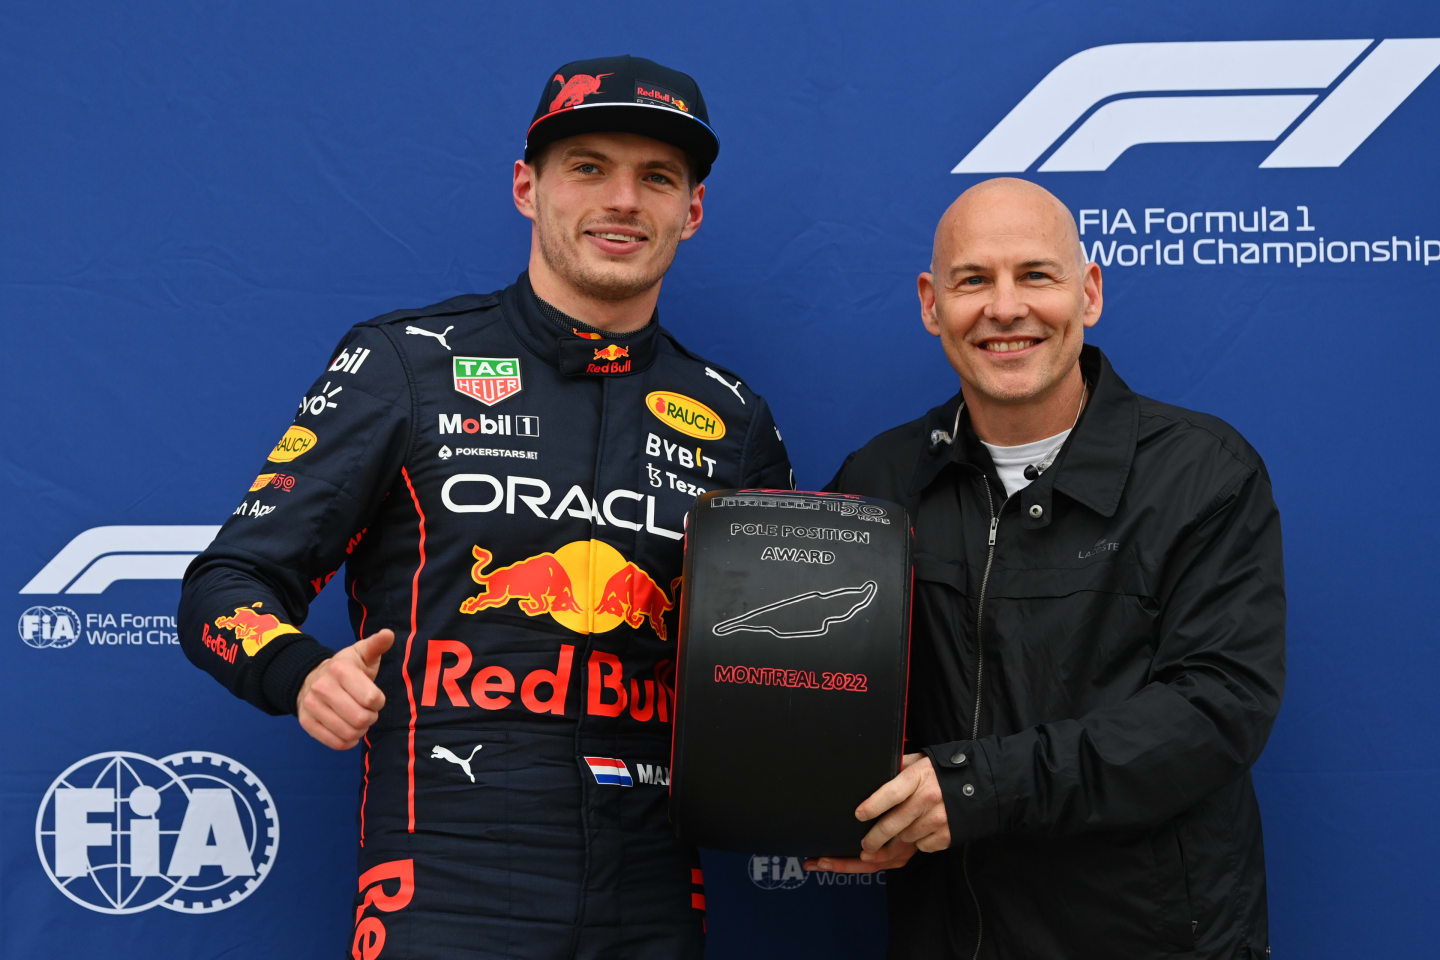 MONTREAL, QUEBEC - JUNE 18: Pole position qualifier Max Verstappen of the Netherlands and Oracle